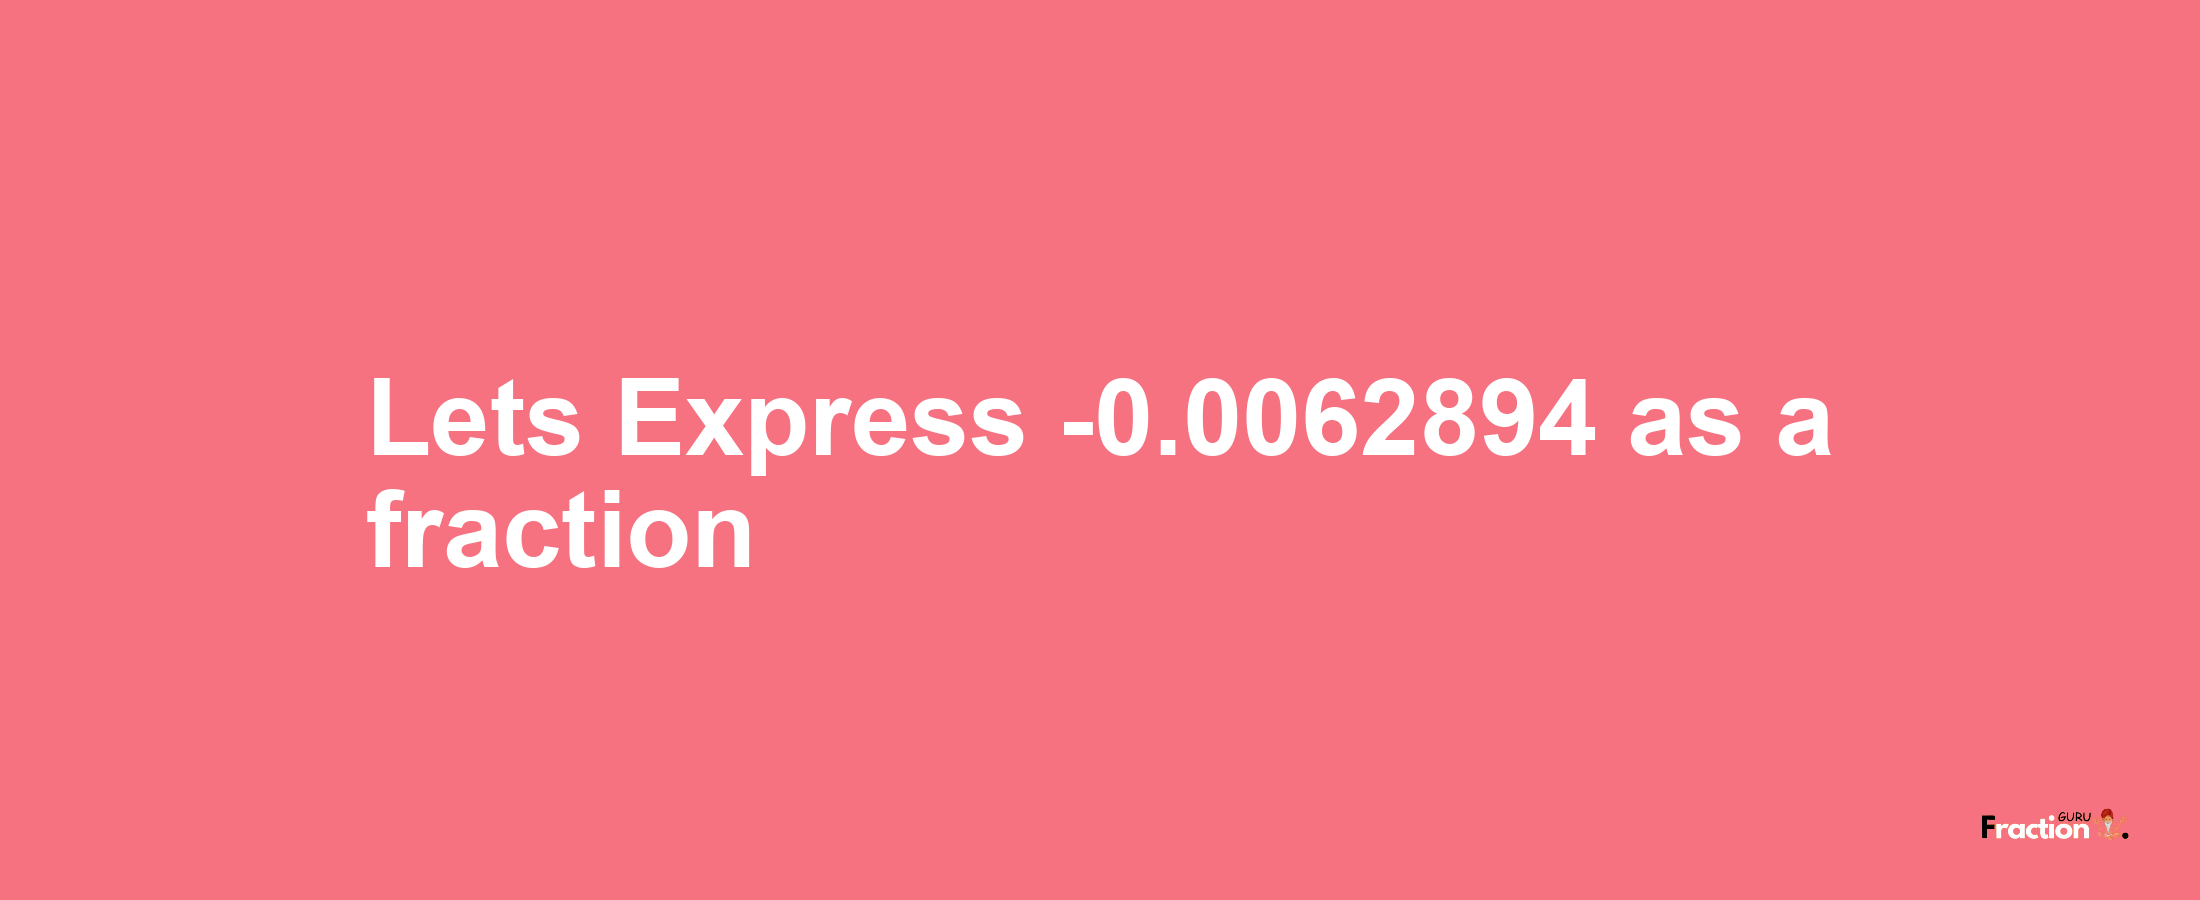 Lets Express -0.0062894 as afraction